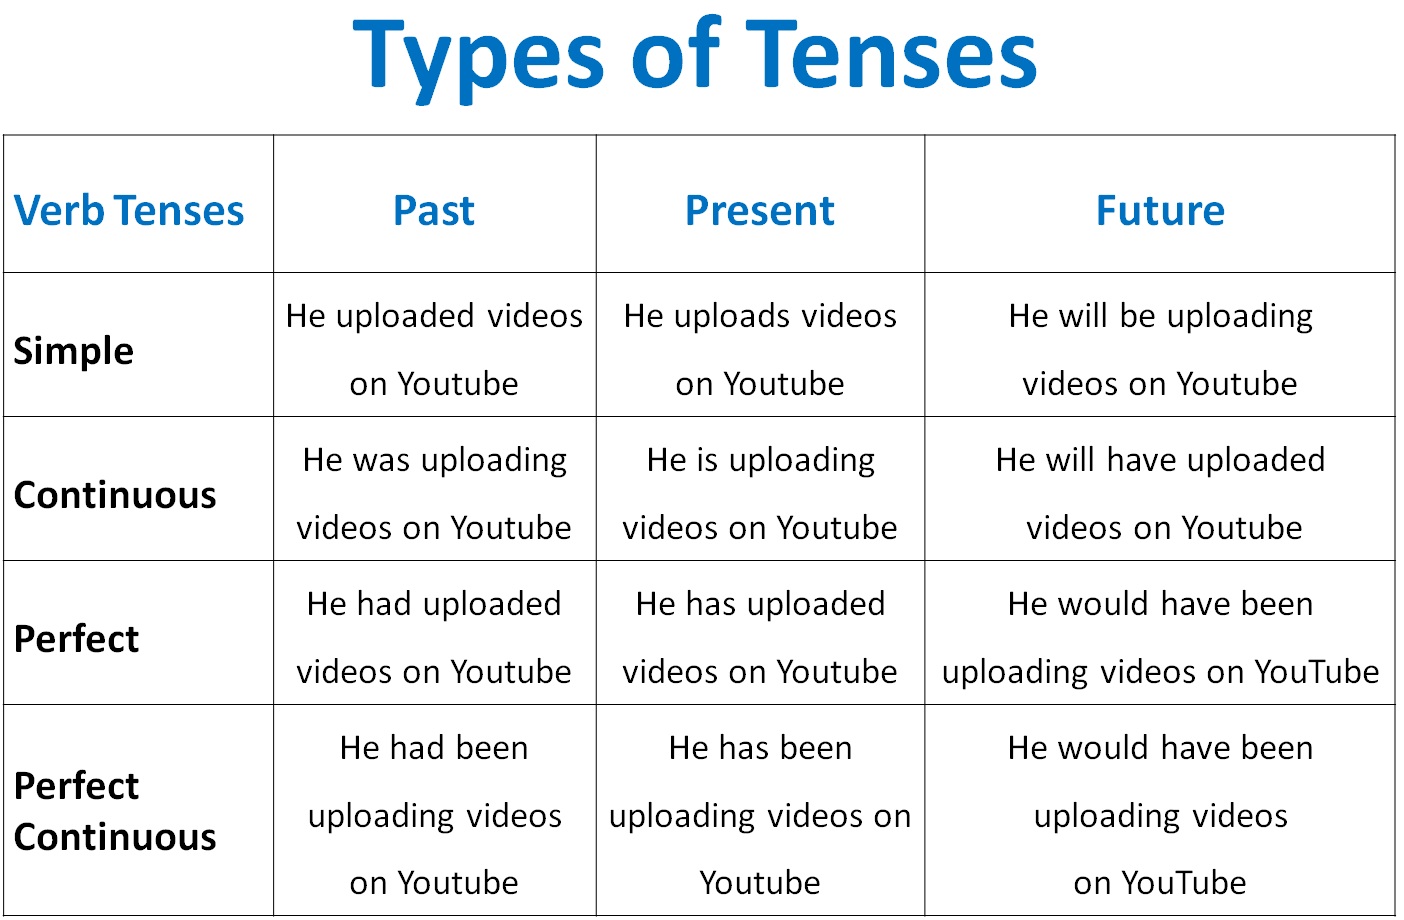 Summary Of Different Tenses Verbs And Tenses